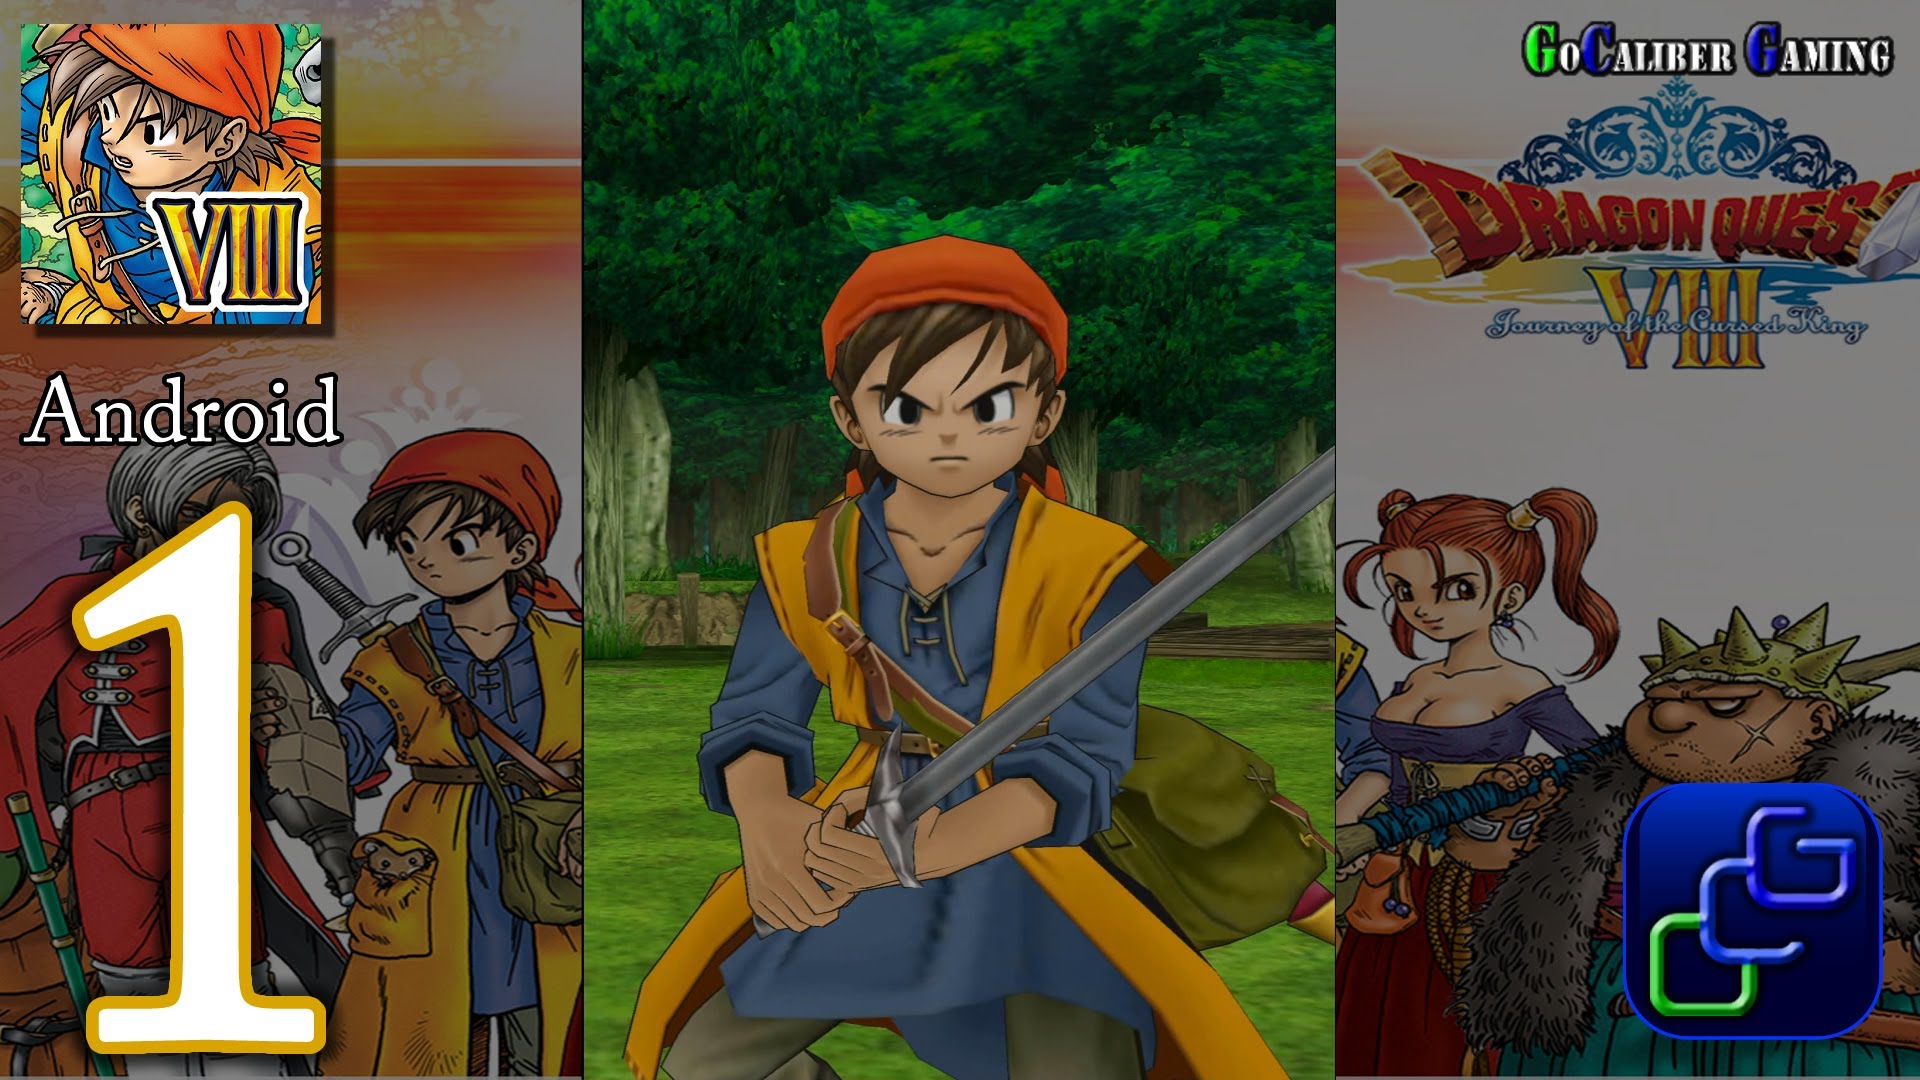 Dragon Quest VIII: Journey Of The Cursed King Pics, Video Game Collection